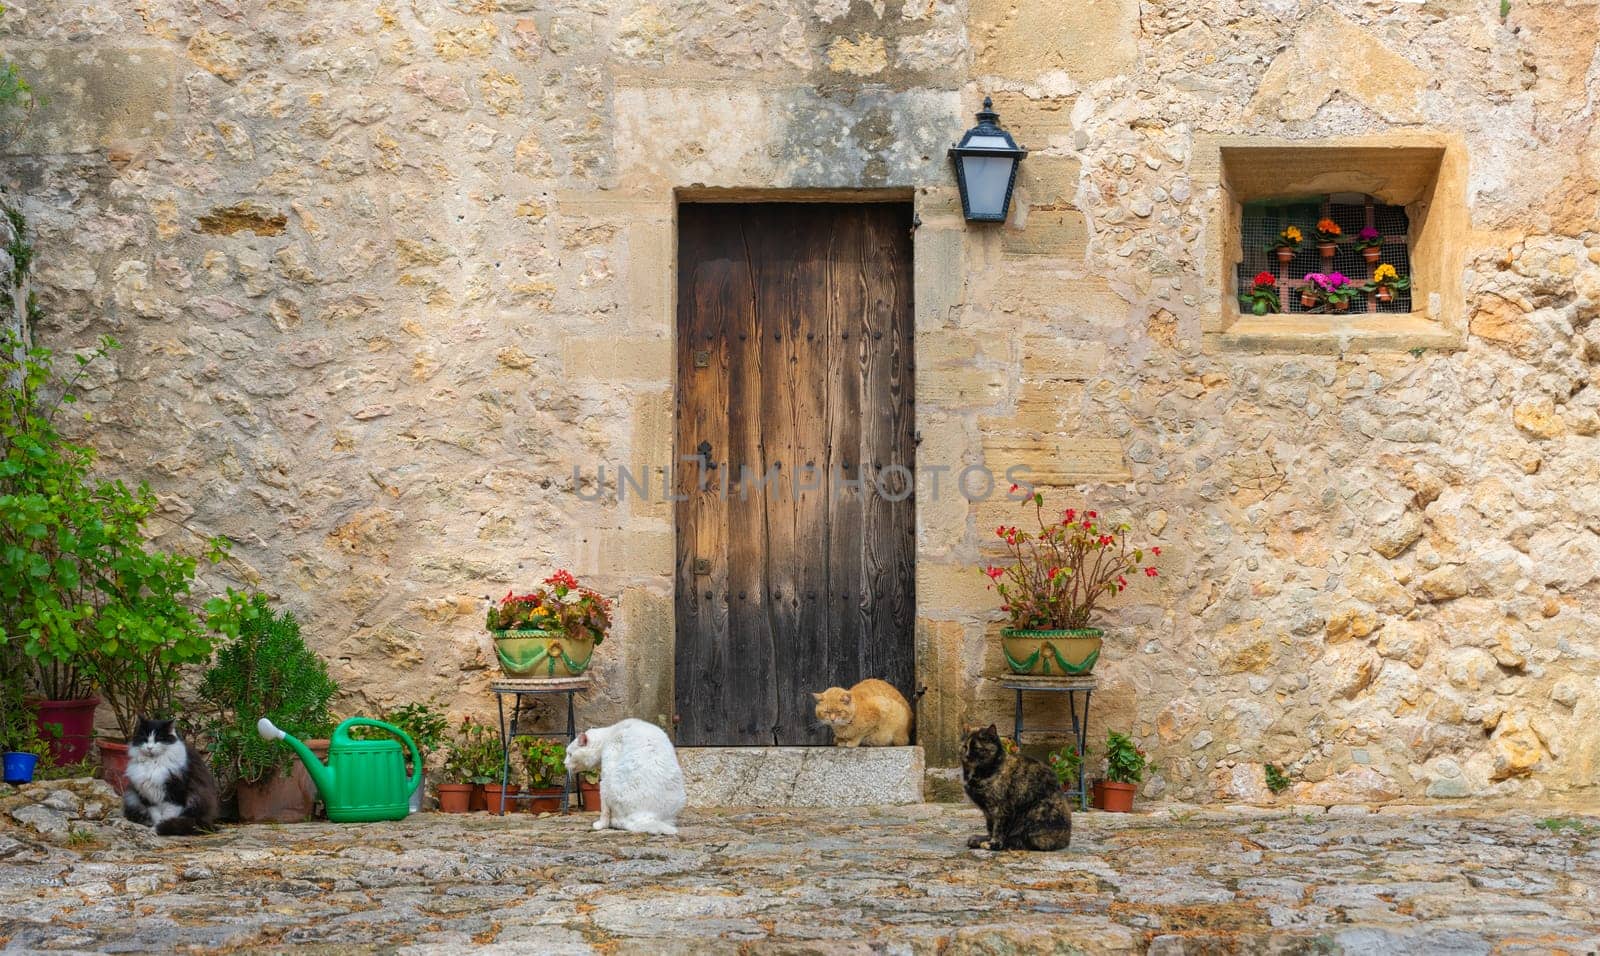 Feline Gathering by the Rustic Stone House with Floral Accents by Juanjo39